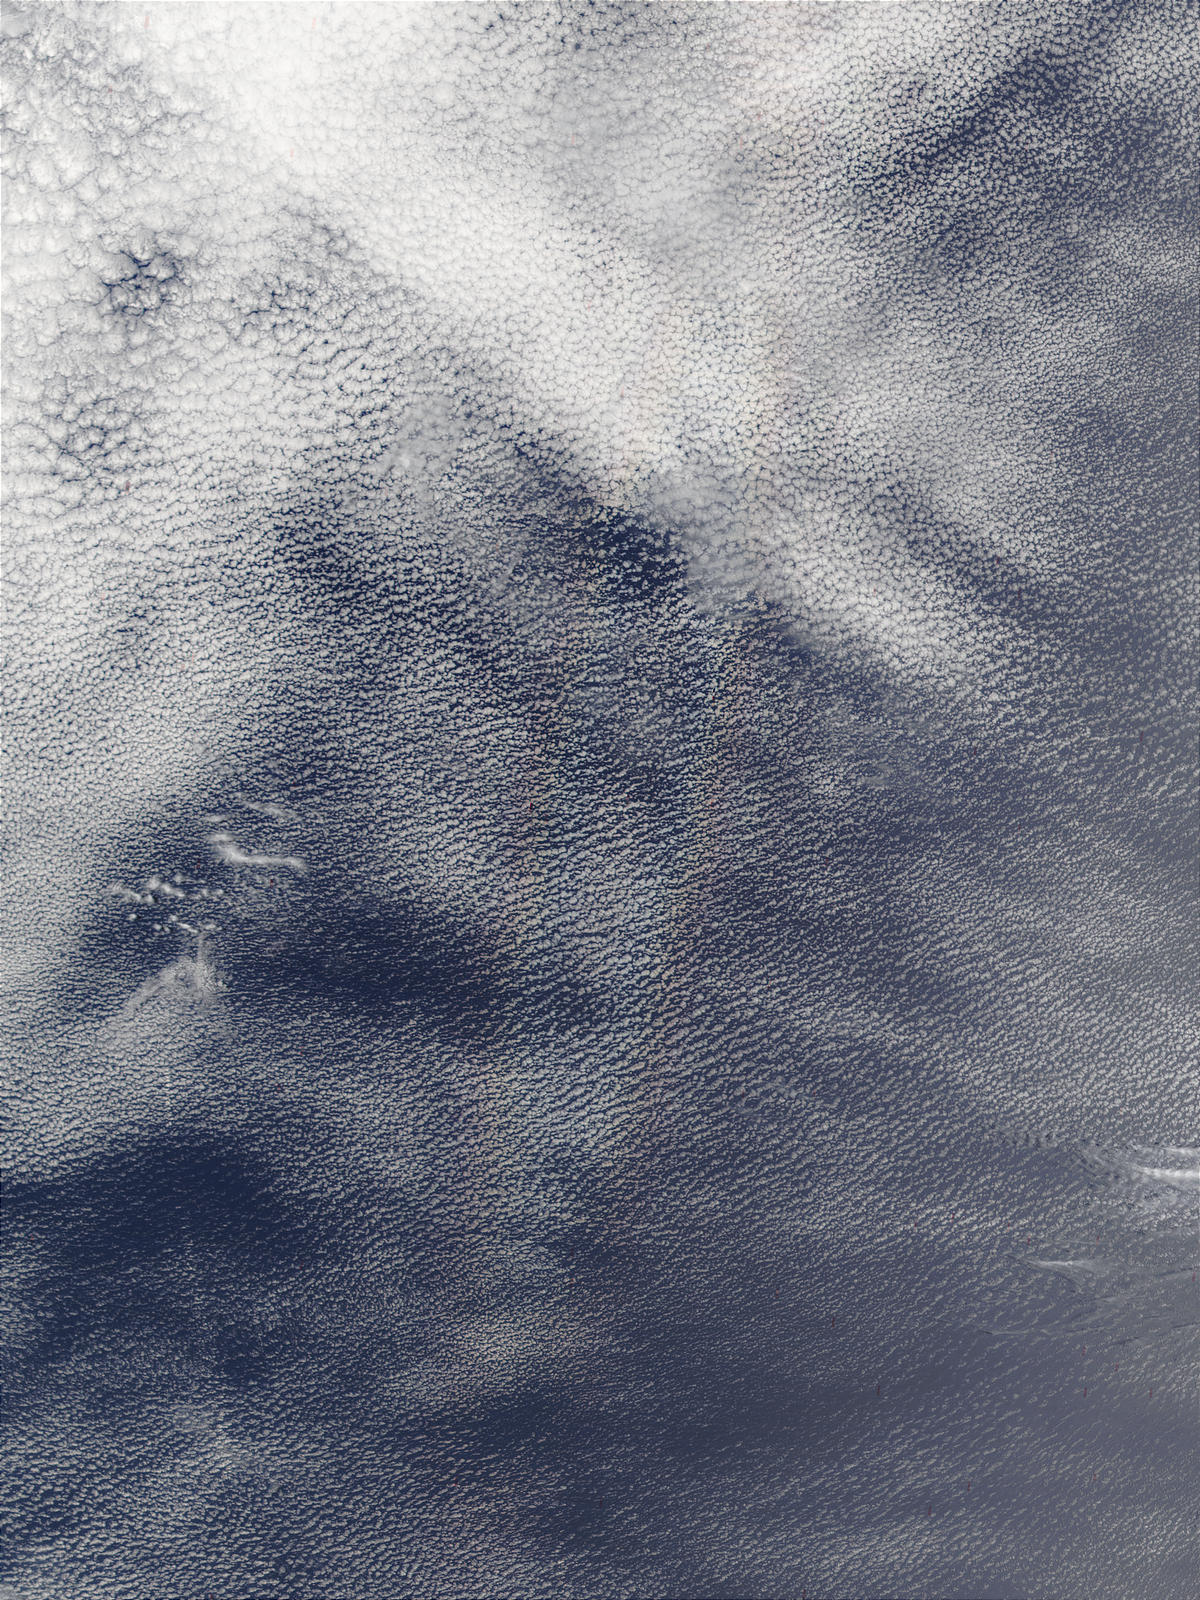 Glory over stratocumulus clouds in Pacific Ocean - related image preview